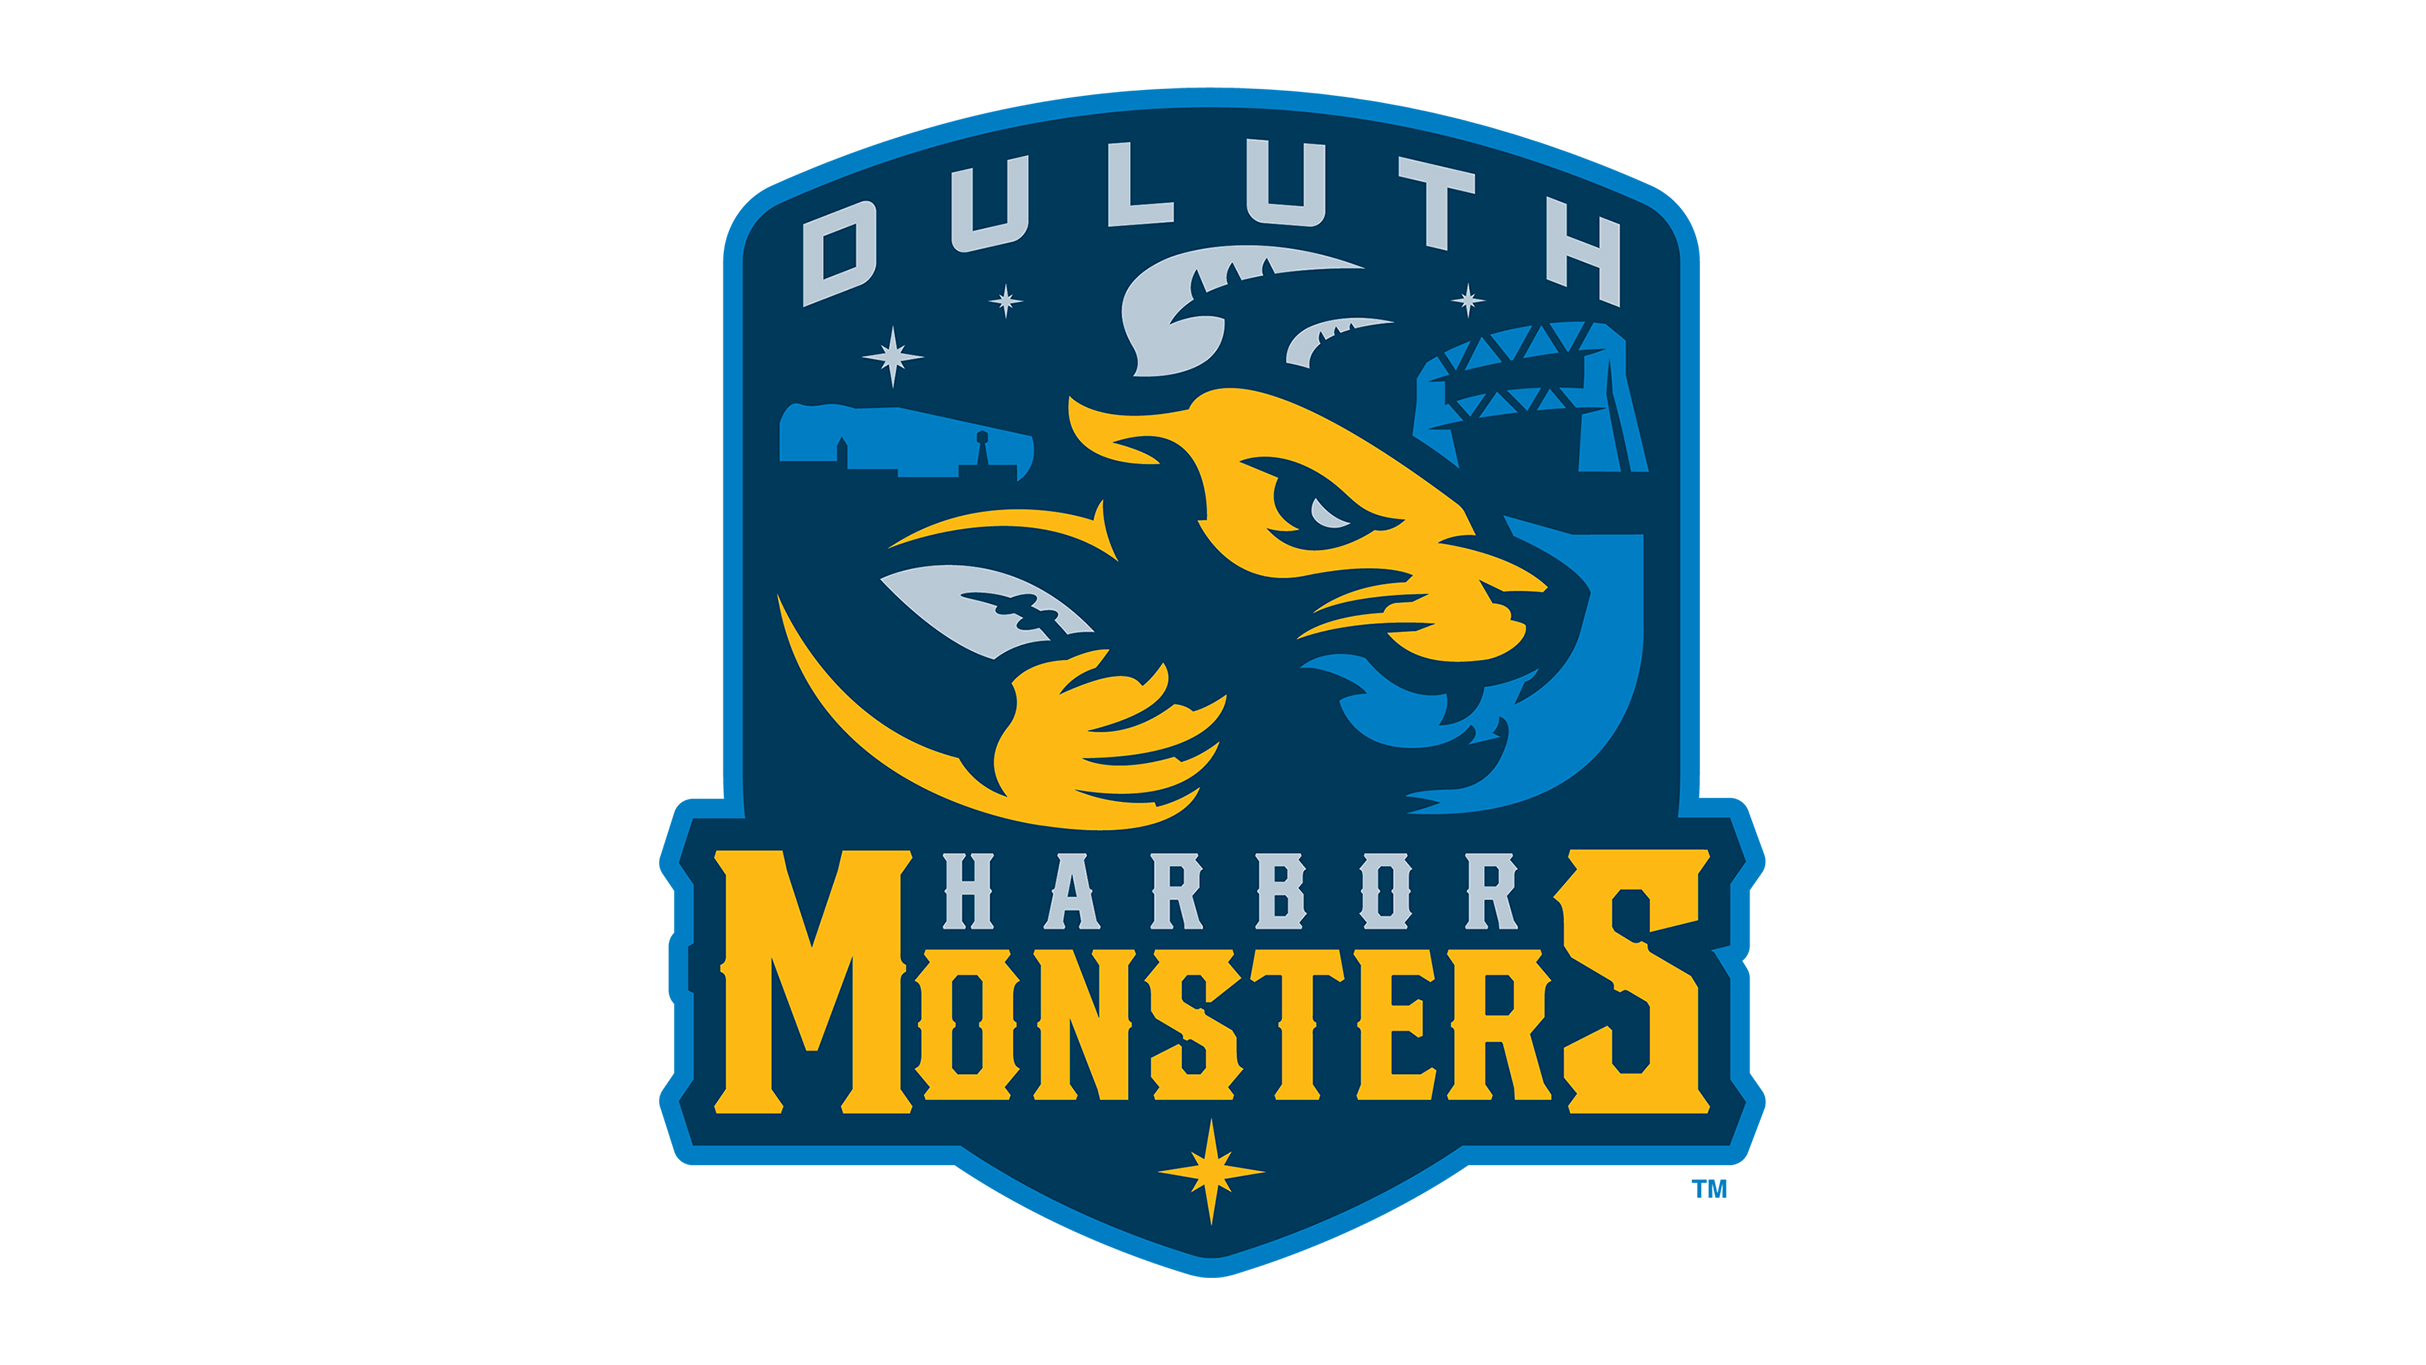 Duluth Harbor Monsters vs. Dallas Falcons